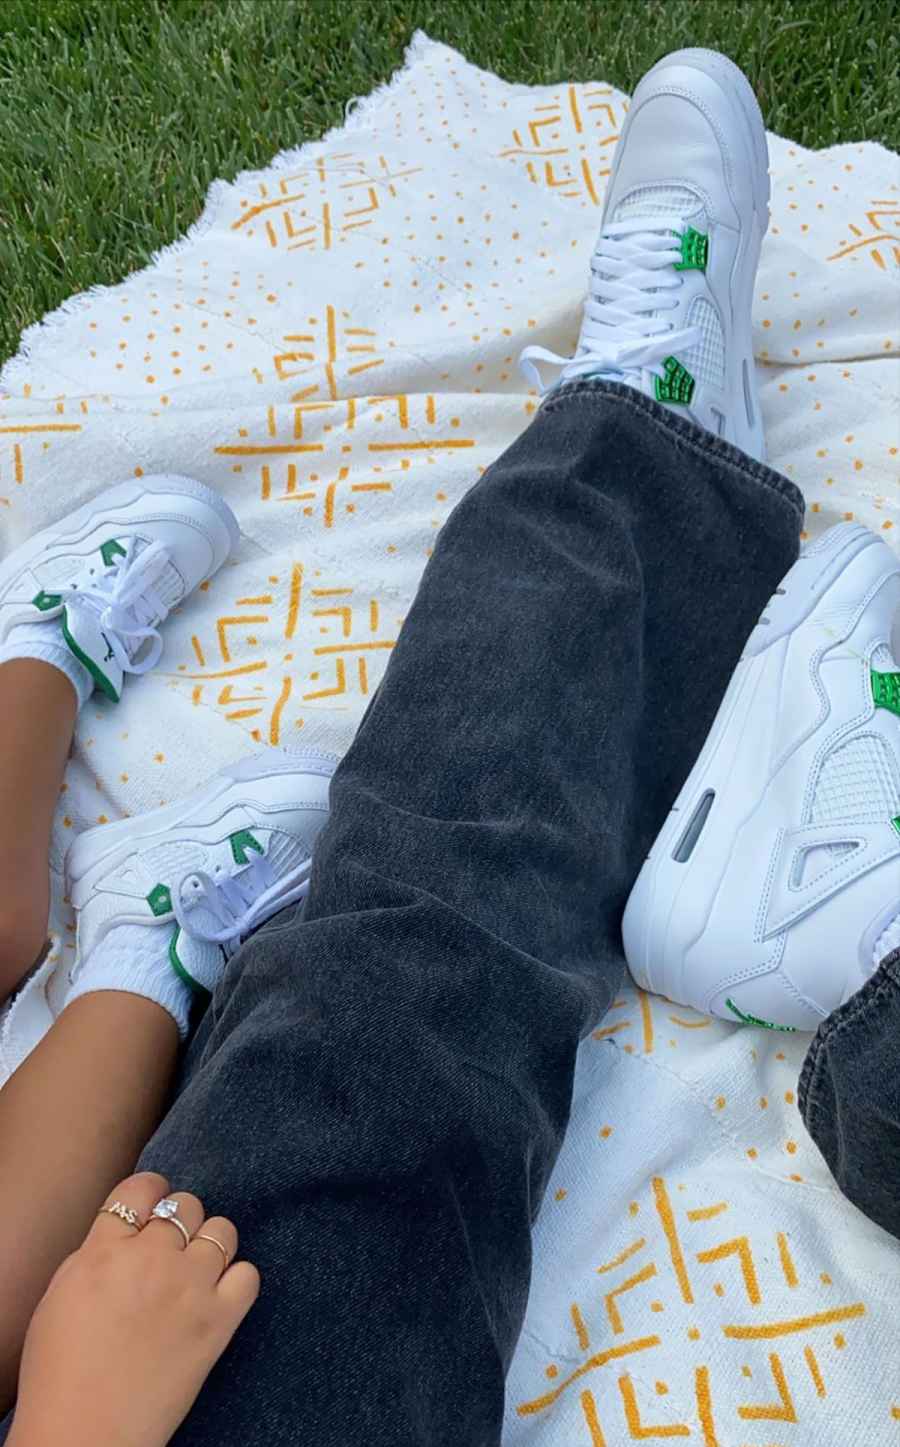 Kylie Jenner and Stormi Are Too Cool for School in Matching Kicks